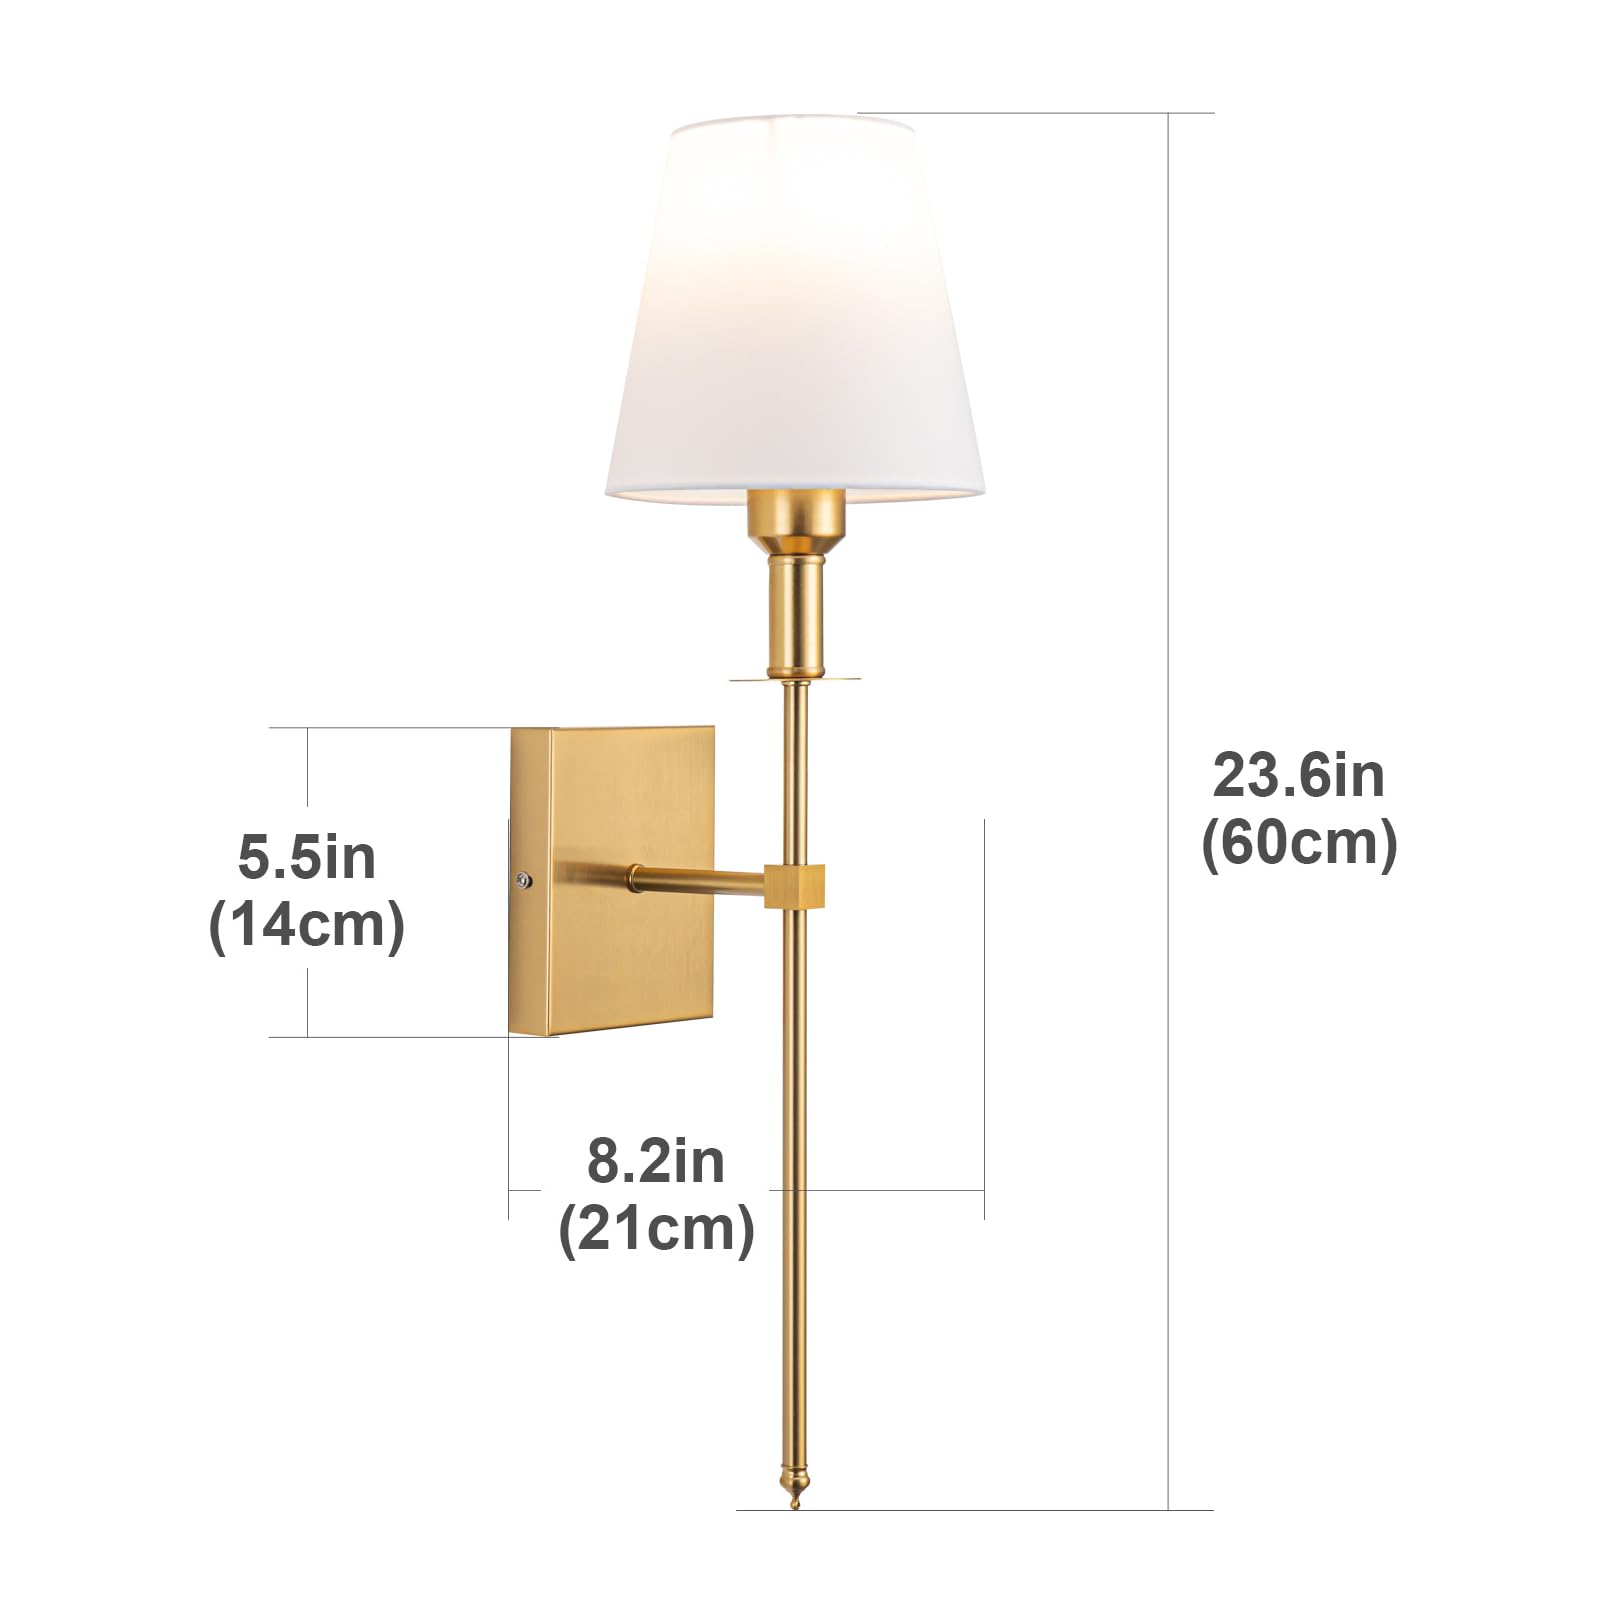 Wall Light Battery Operated Sconce Set Of 2，not Hardwired Fixture,Battery Powered Wall Sconce With Remote Dimmable Light Bulb,Easy To Install Not Wires,for Bedroom, Lounge, Farmhouse ( Color : Gold )